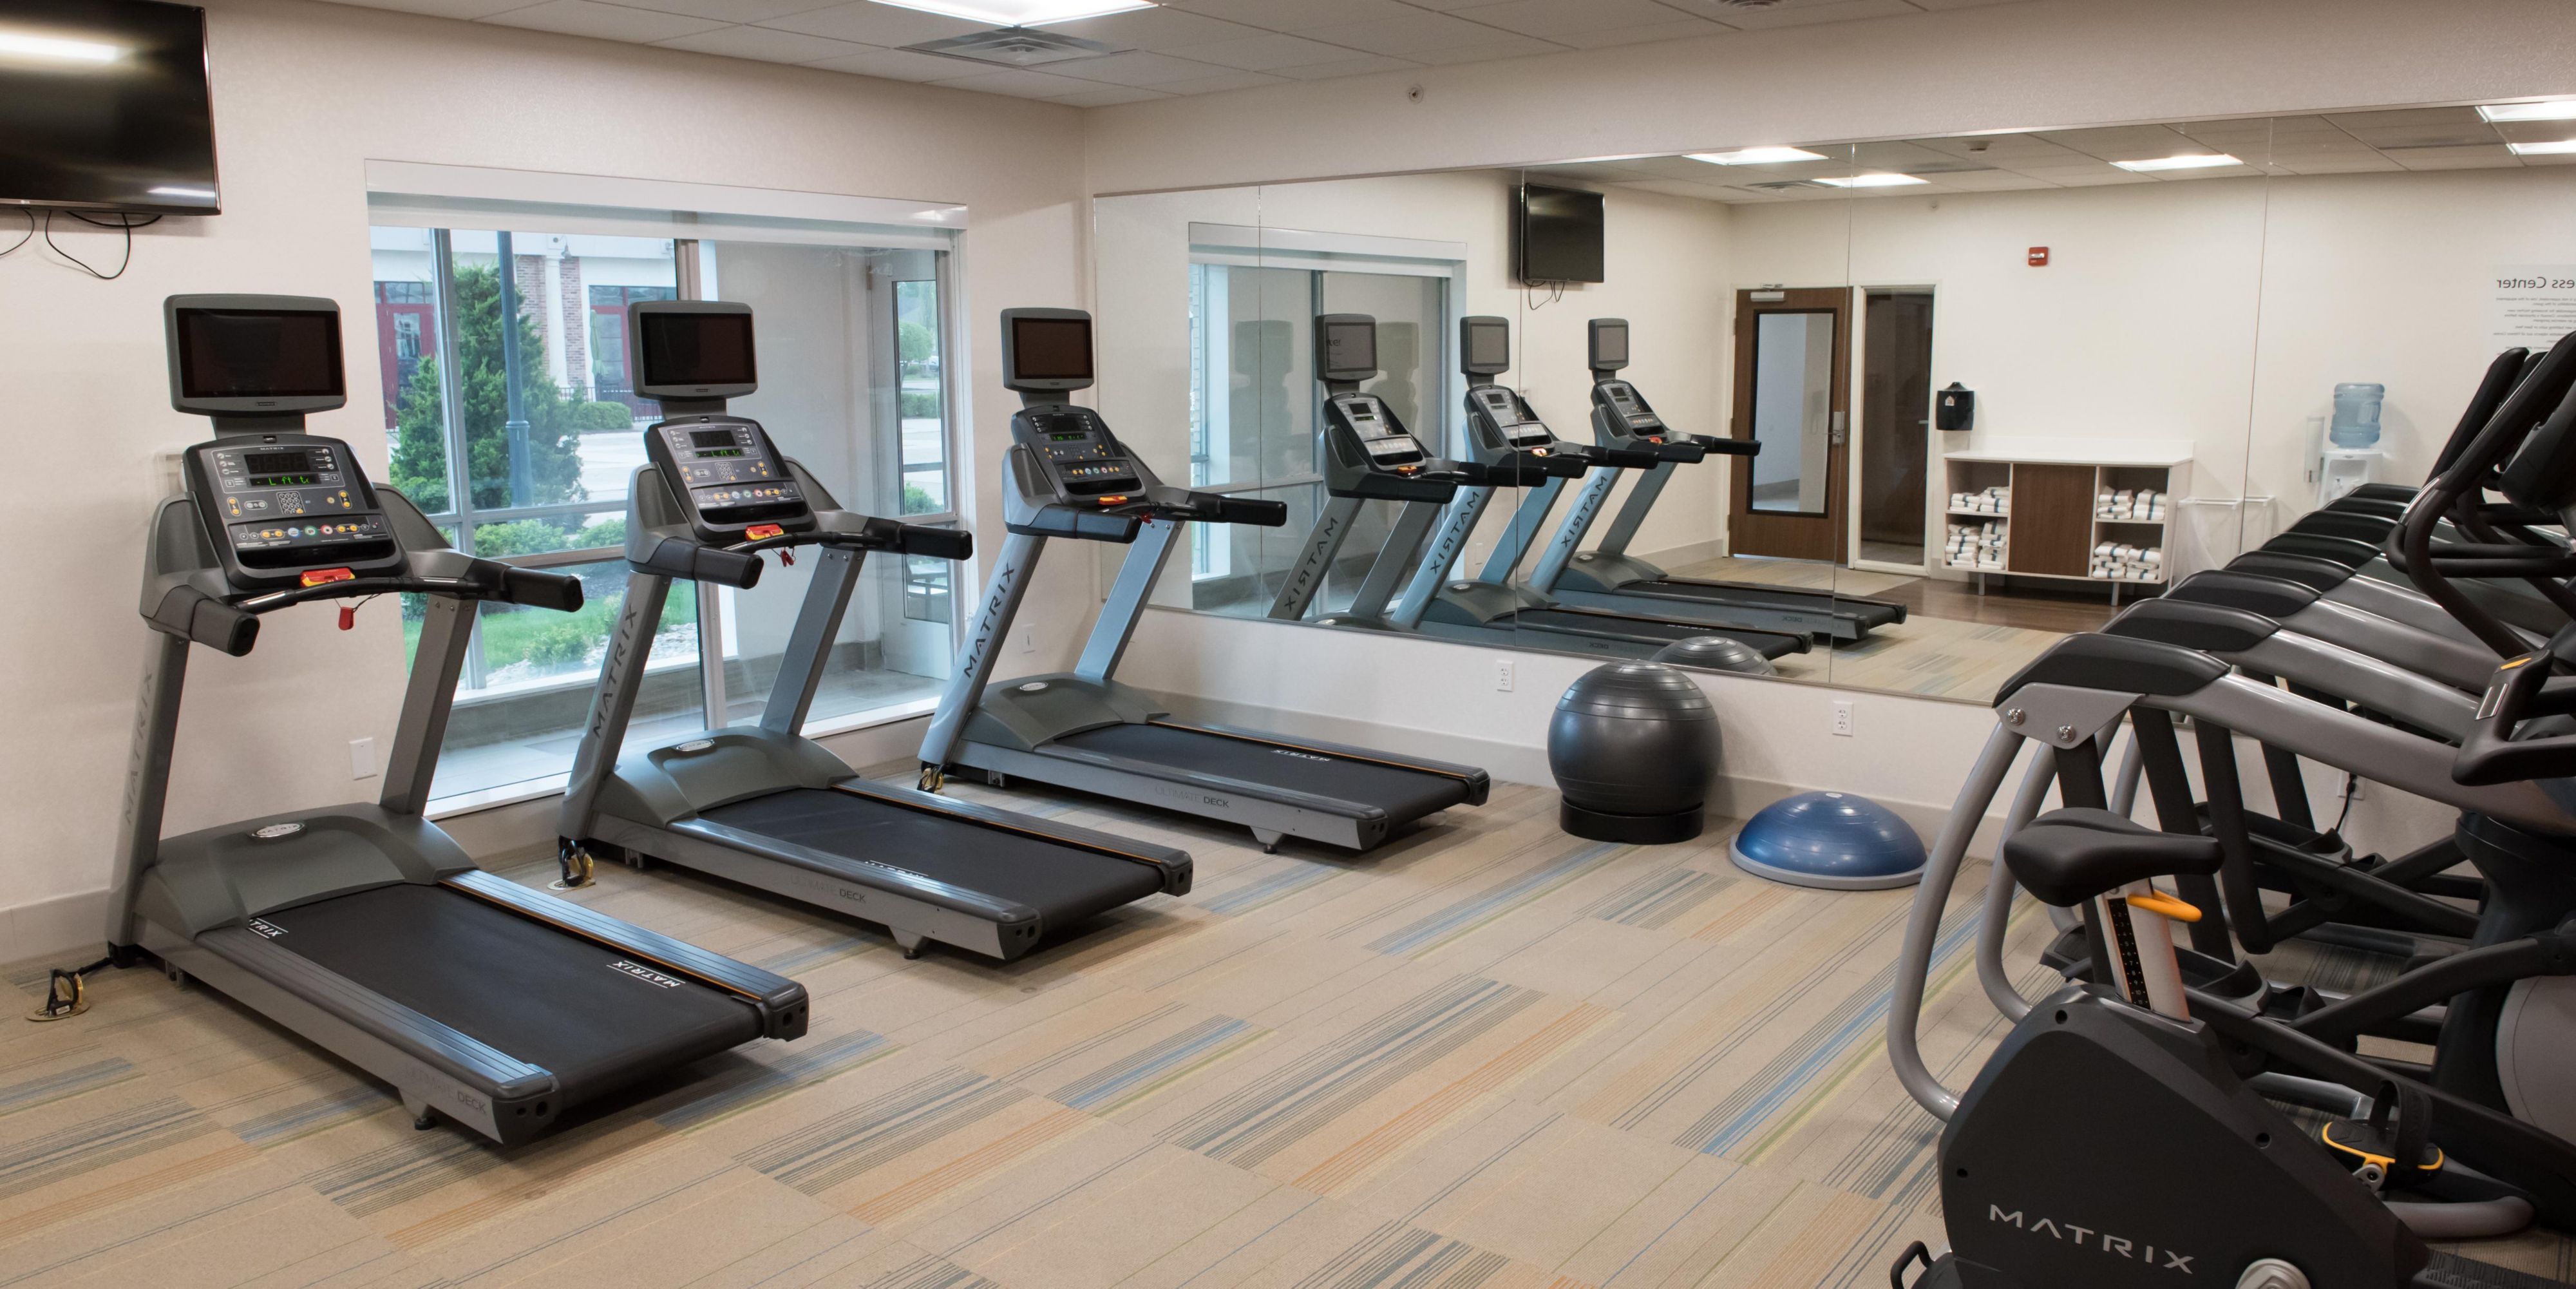 Our 24-hour Fitness Center is the perfect way to stay fit while away from your home fitness center.